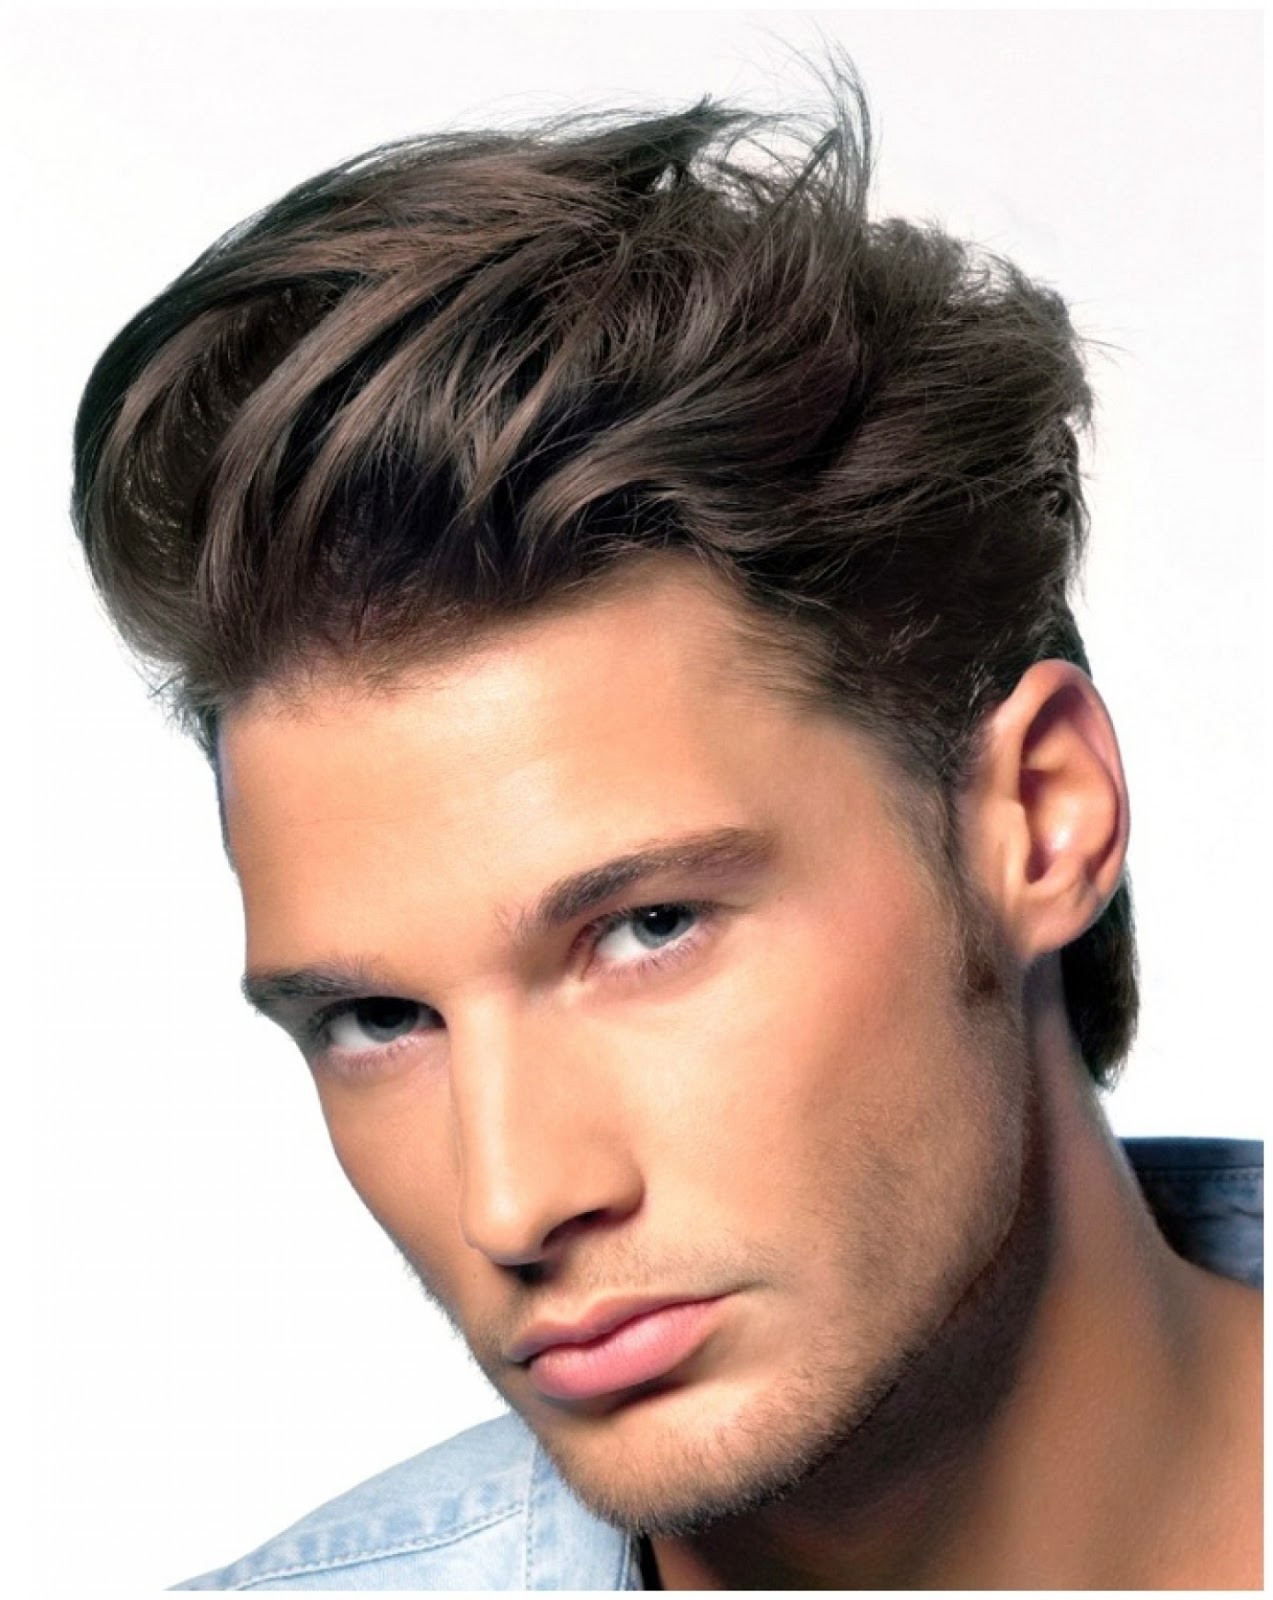 Undercut Hairstyles For Men
 The Undercut e The Best Hairstyle For Men